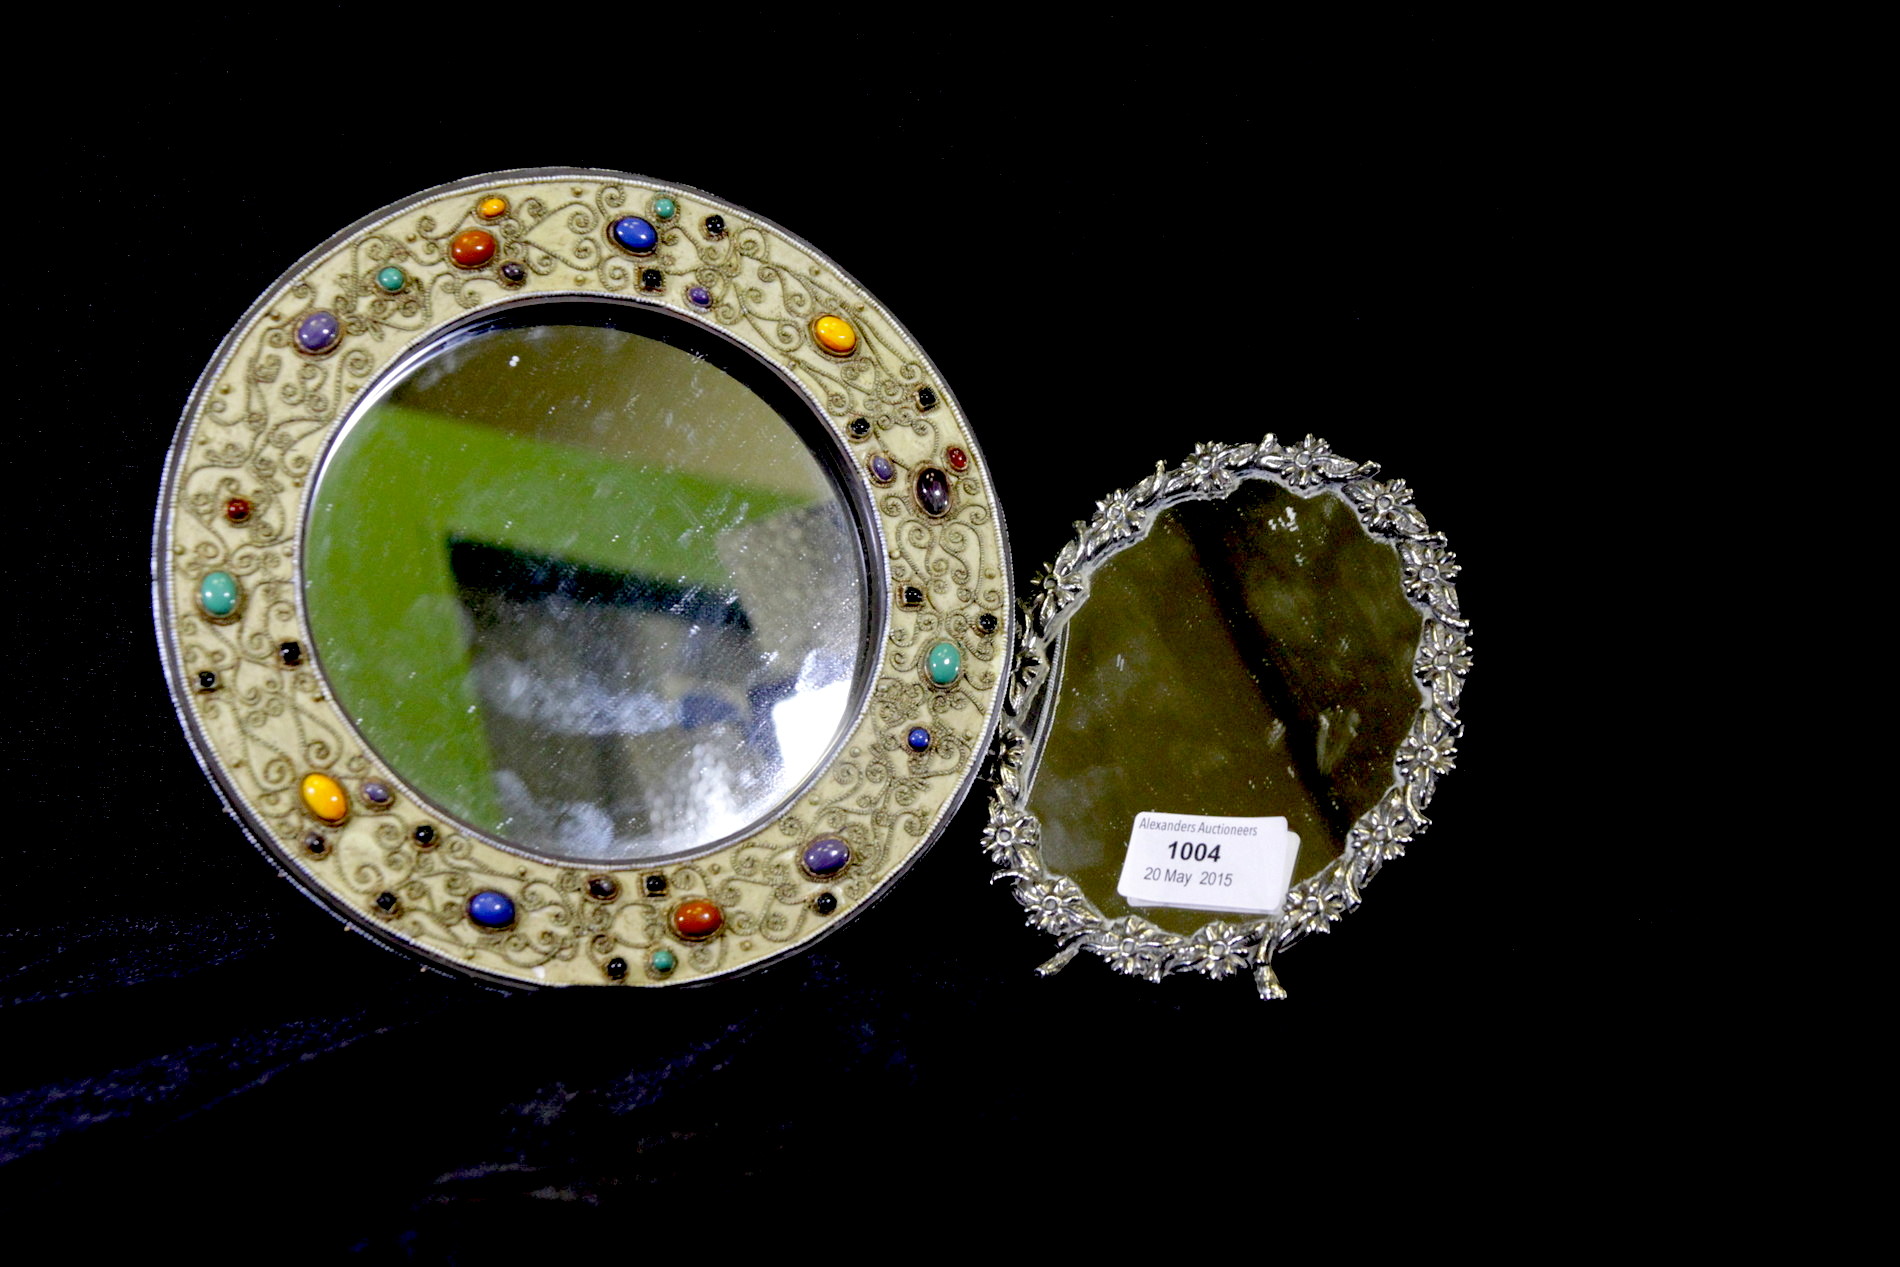 A circular hand painted mirror with ceramic bead decoration plus another mirror with a decorative